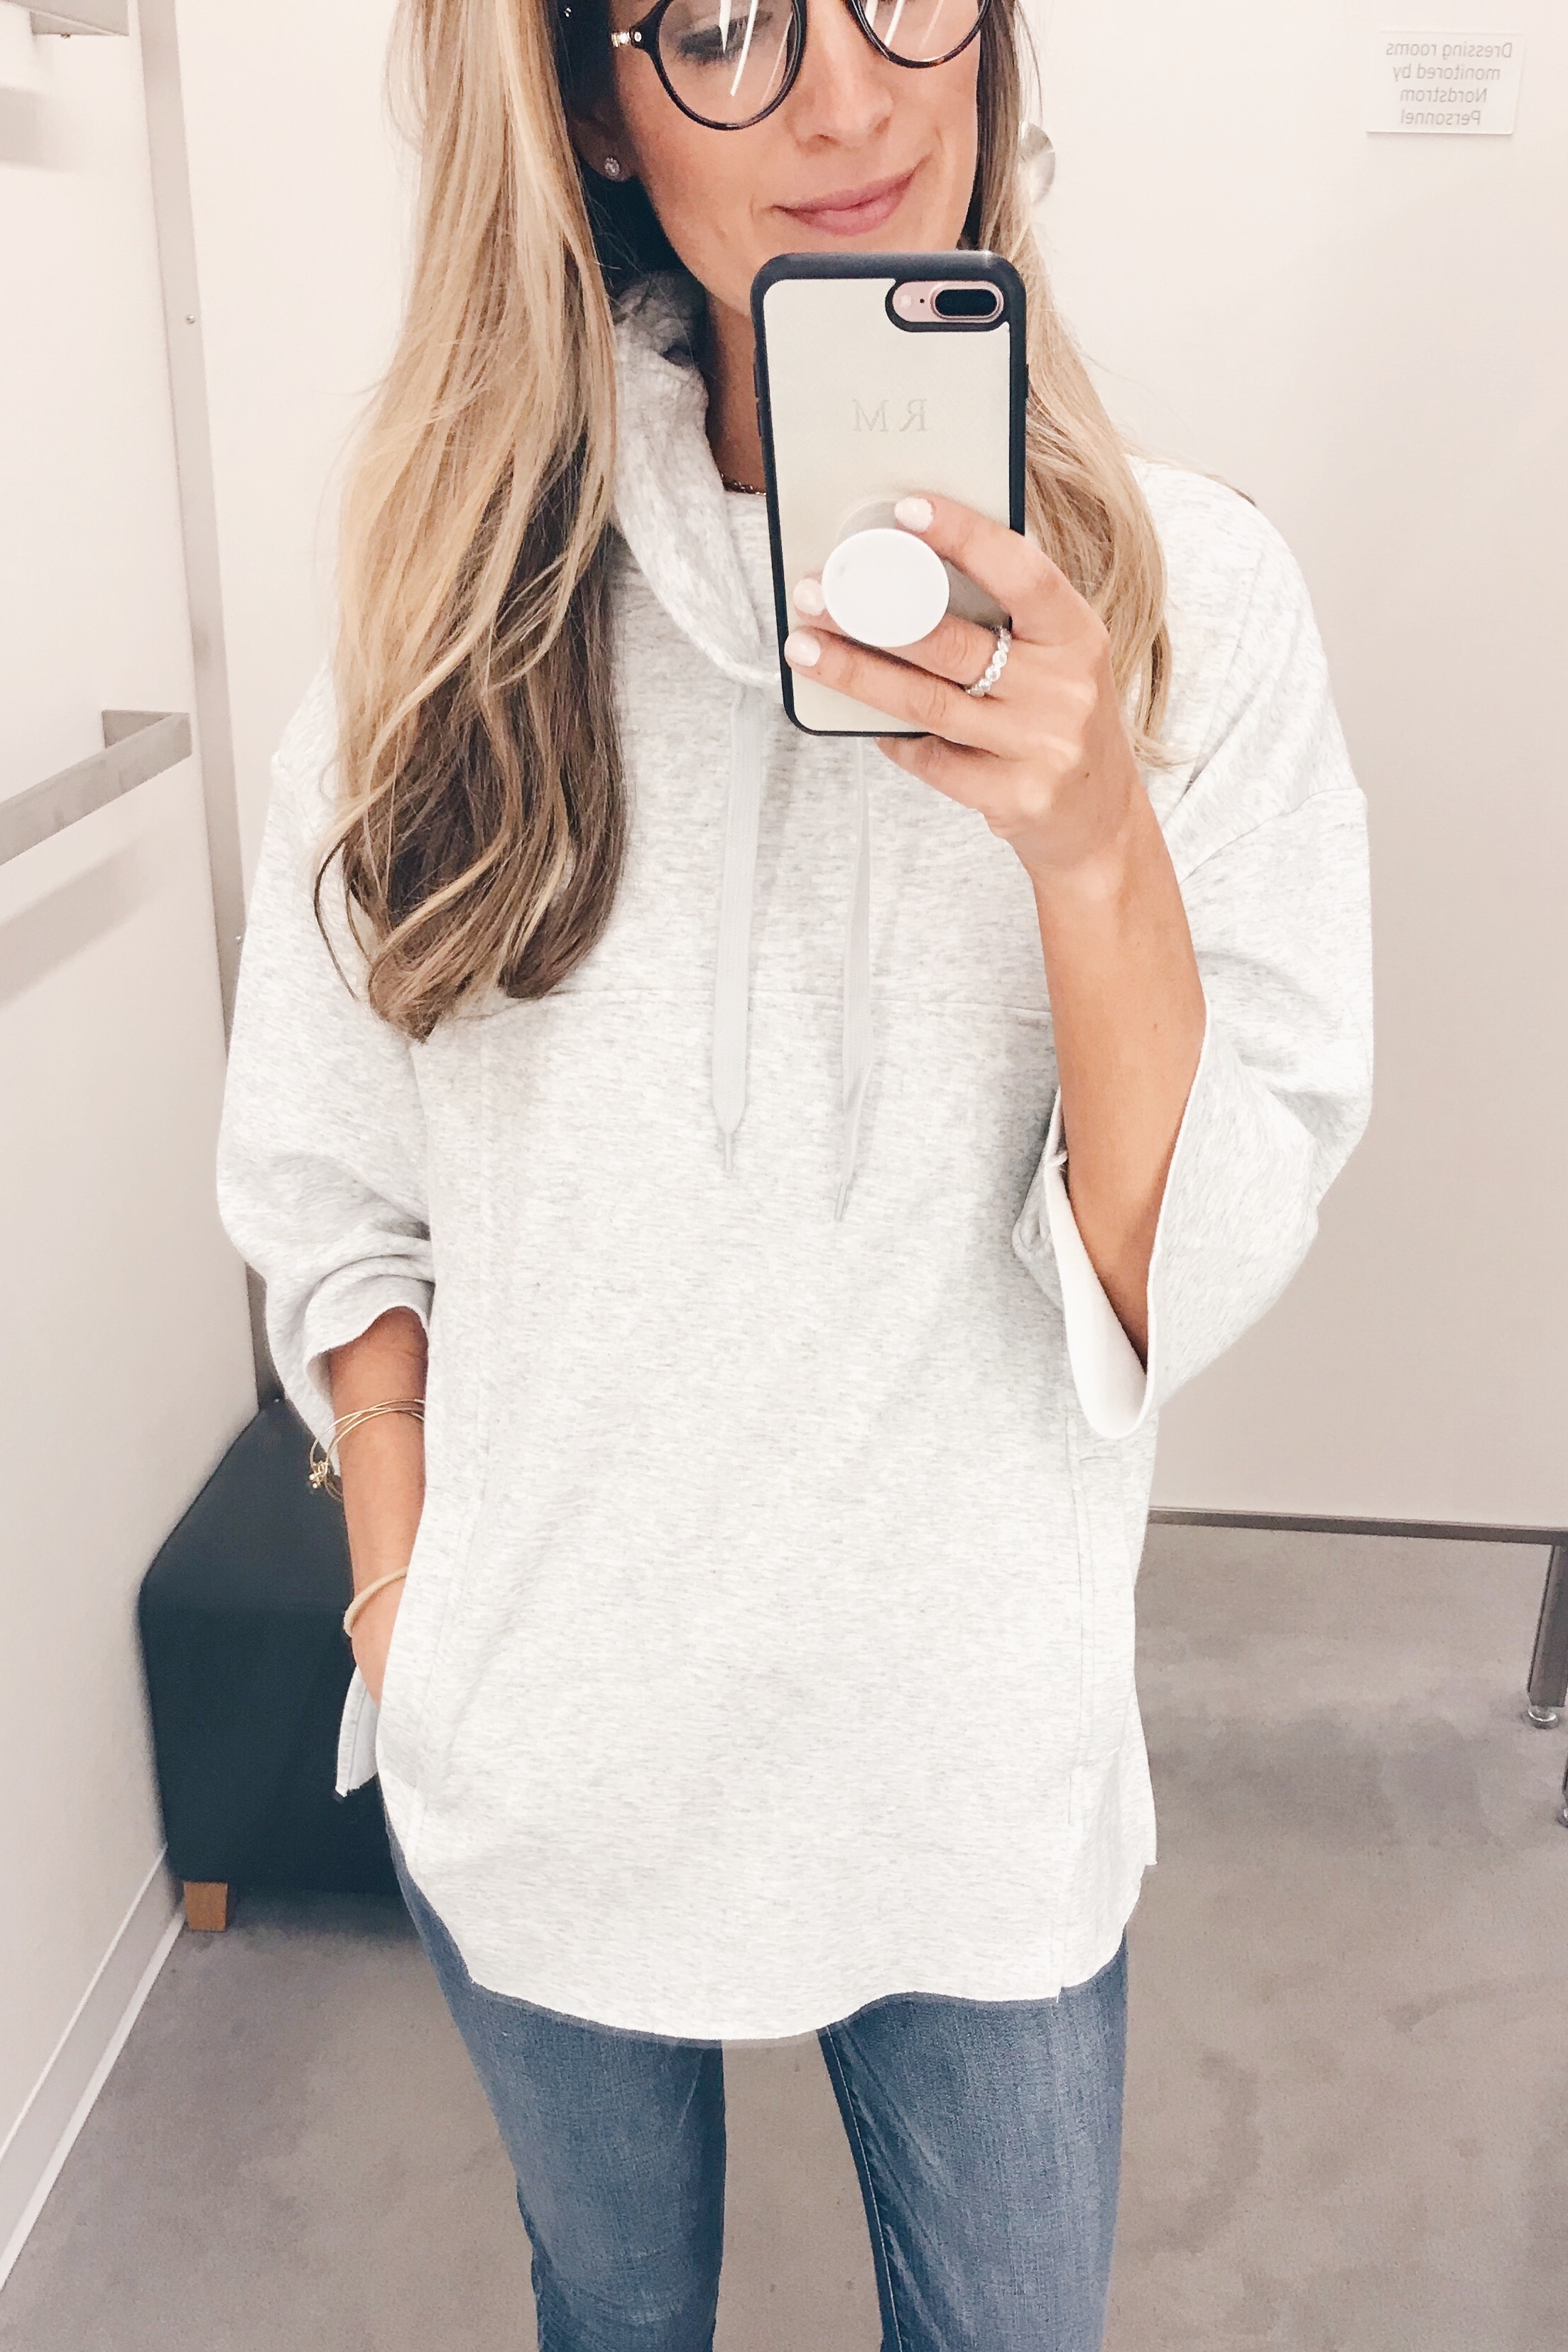 Nordstrom Anniversary Sale 2018 Dressing Room Outfits - Oversized Sweatshirt